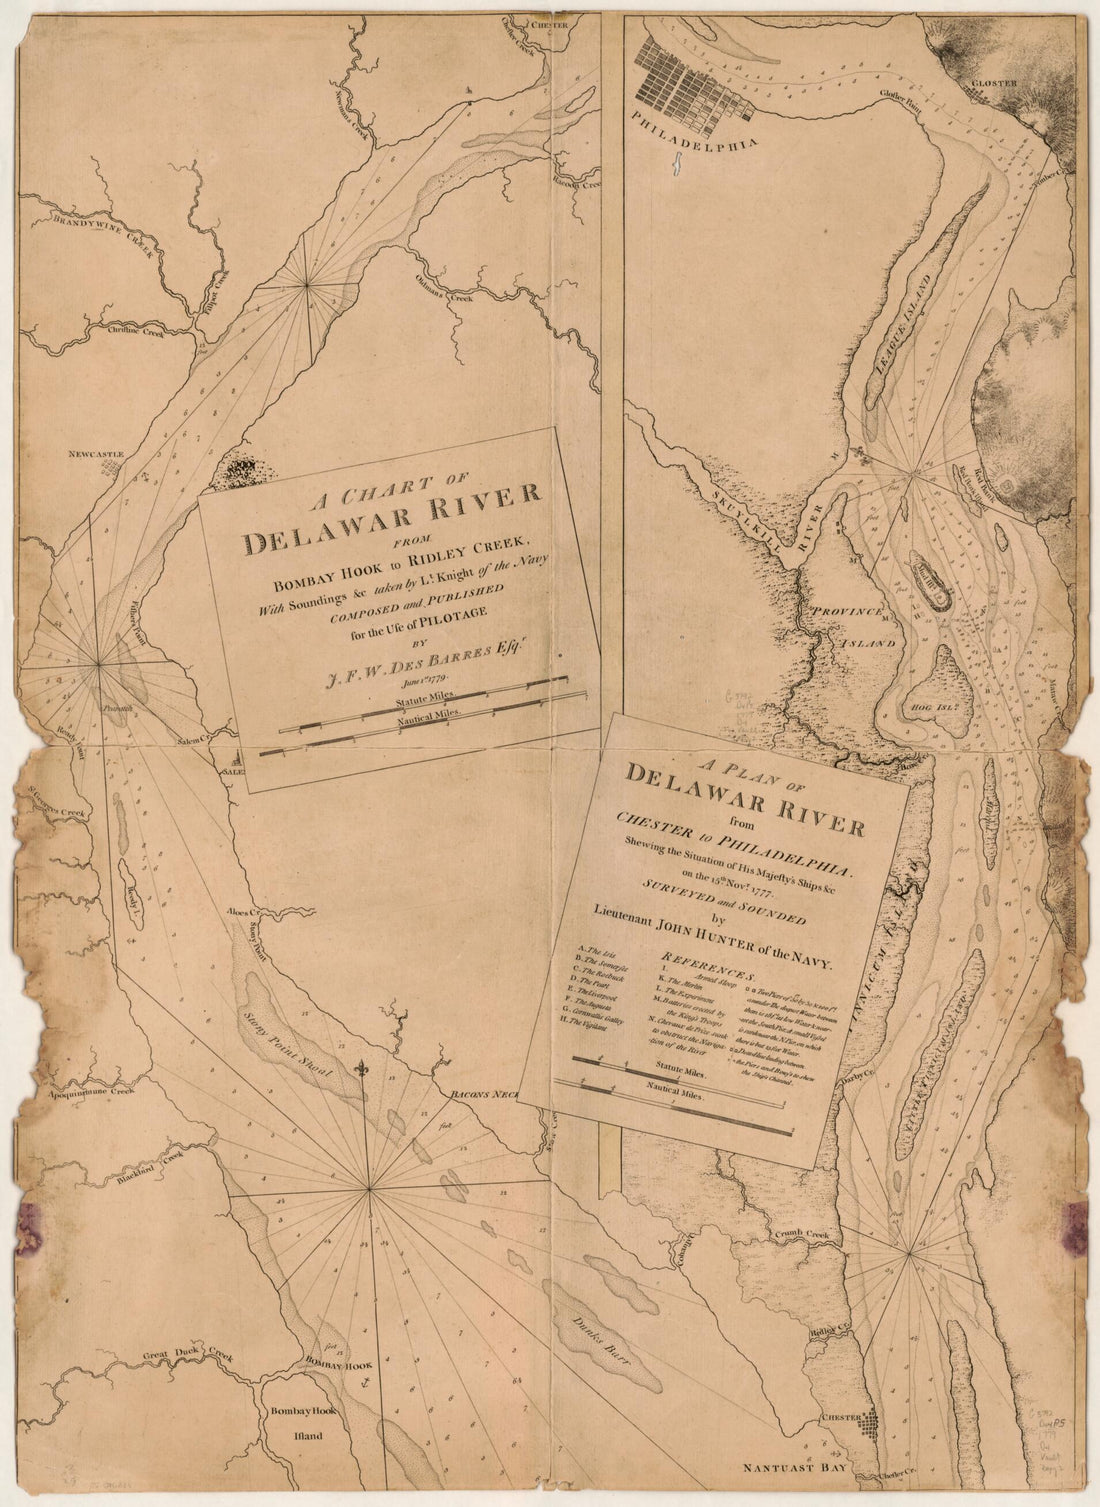 This old map of A Chart of Delawar River from Bombay Hook to Ridley Creek, With Soundings &amp;c Taken by Lt. Knight of the Navy from 1779 was created by Joseph F. W. (Joseph Frederick Wallet) Des Barres, John Hunter, John Knight in 1779